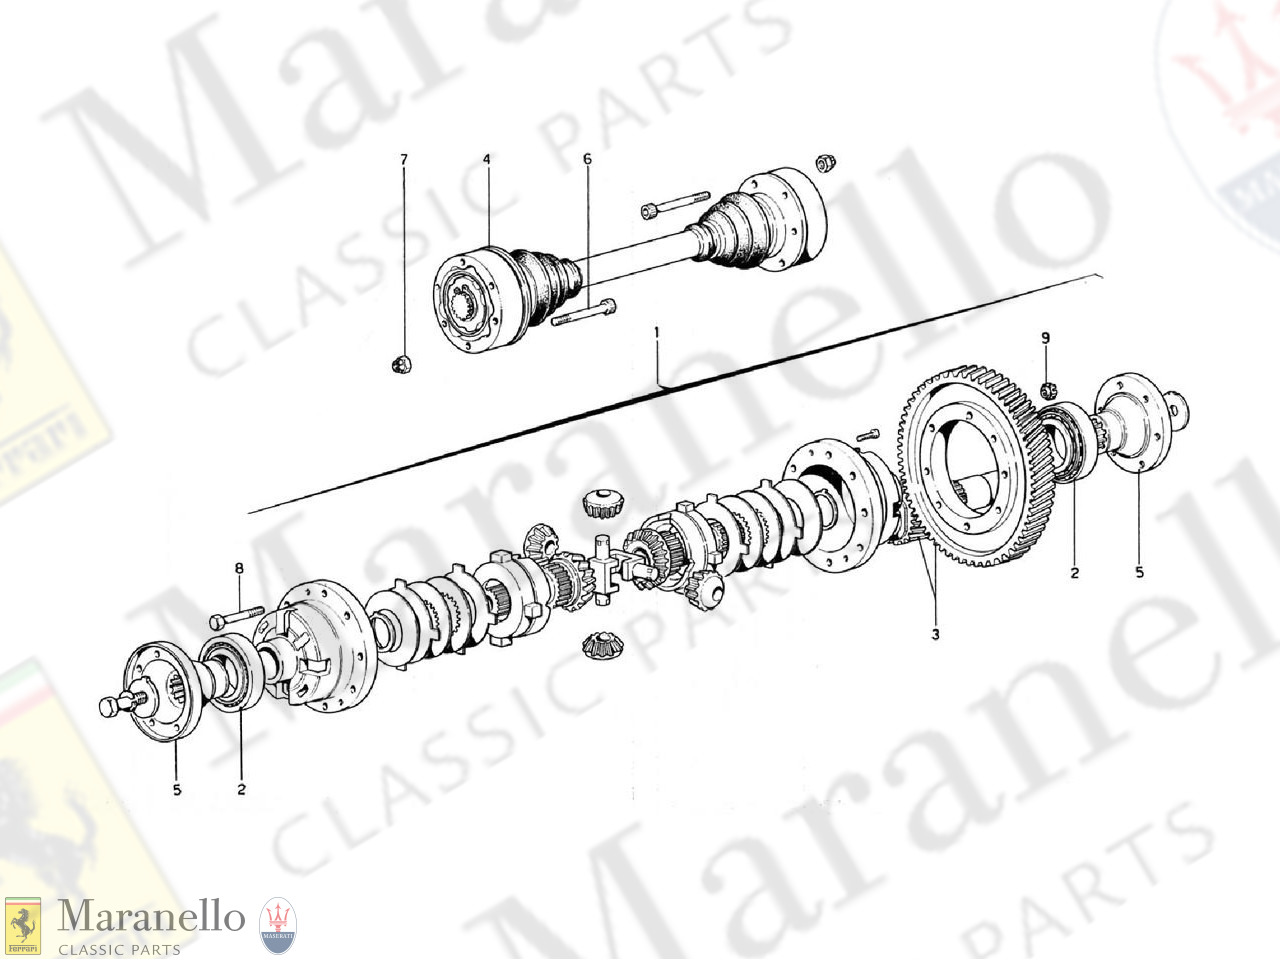 027 - Differential And Axle Shafts